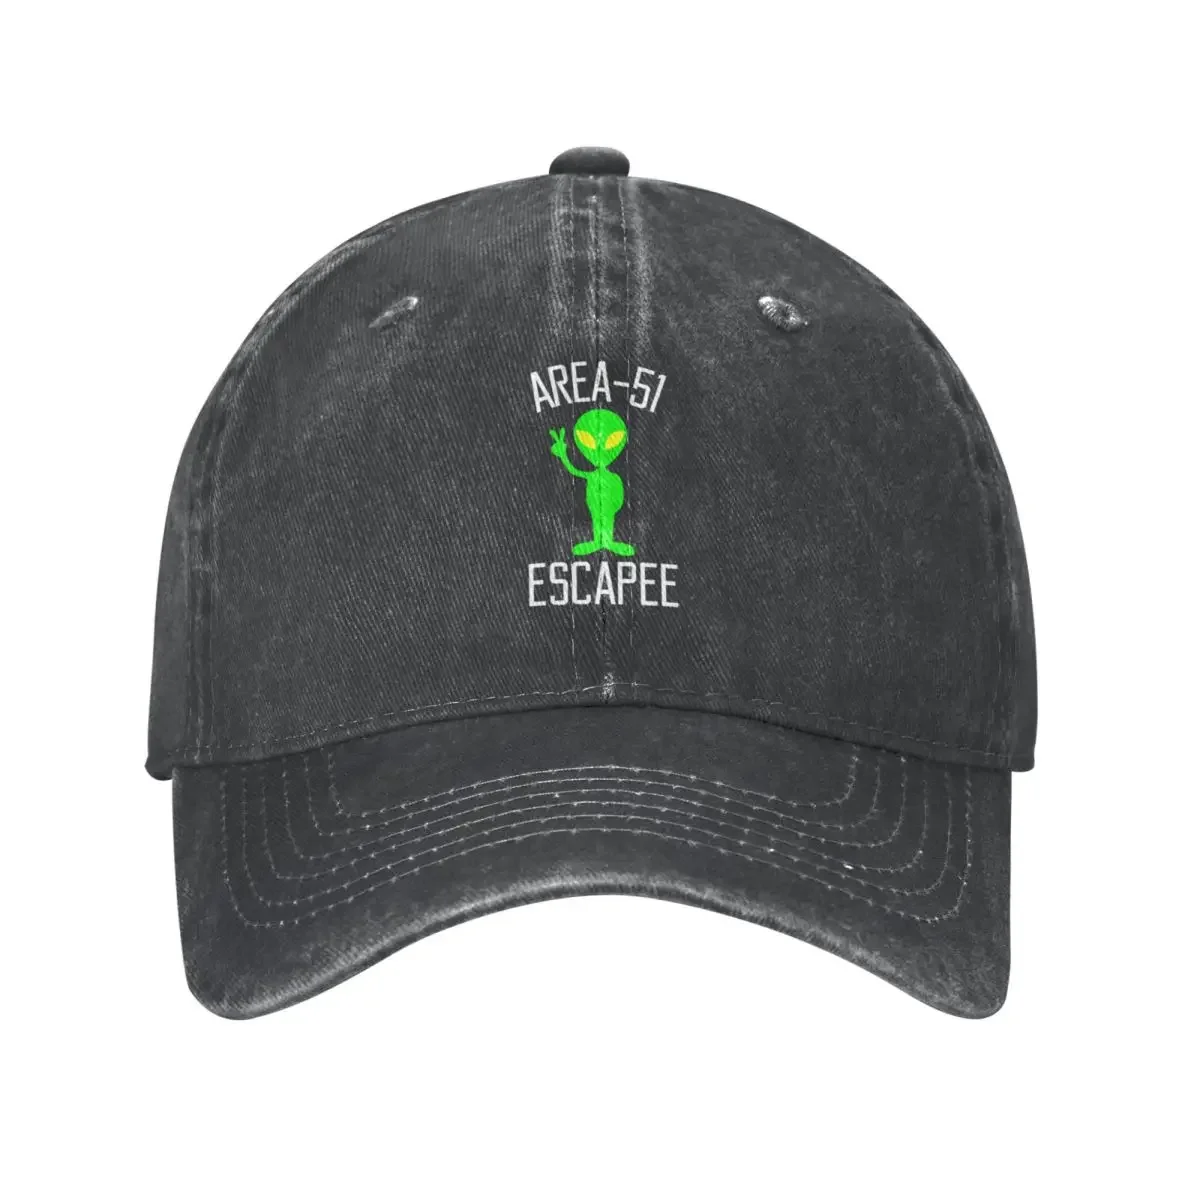 

Area 51 Escapee - Funny Alien UFO Area-51 Storm Meme Extraterrestrials Flying Saucer Roswell Cowboy Hat